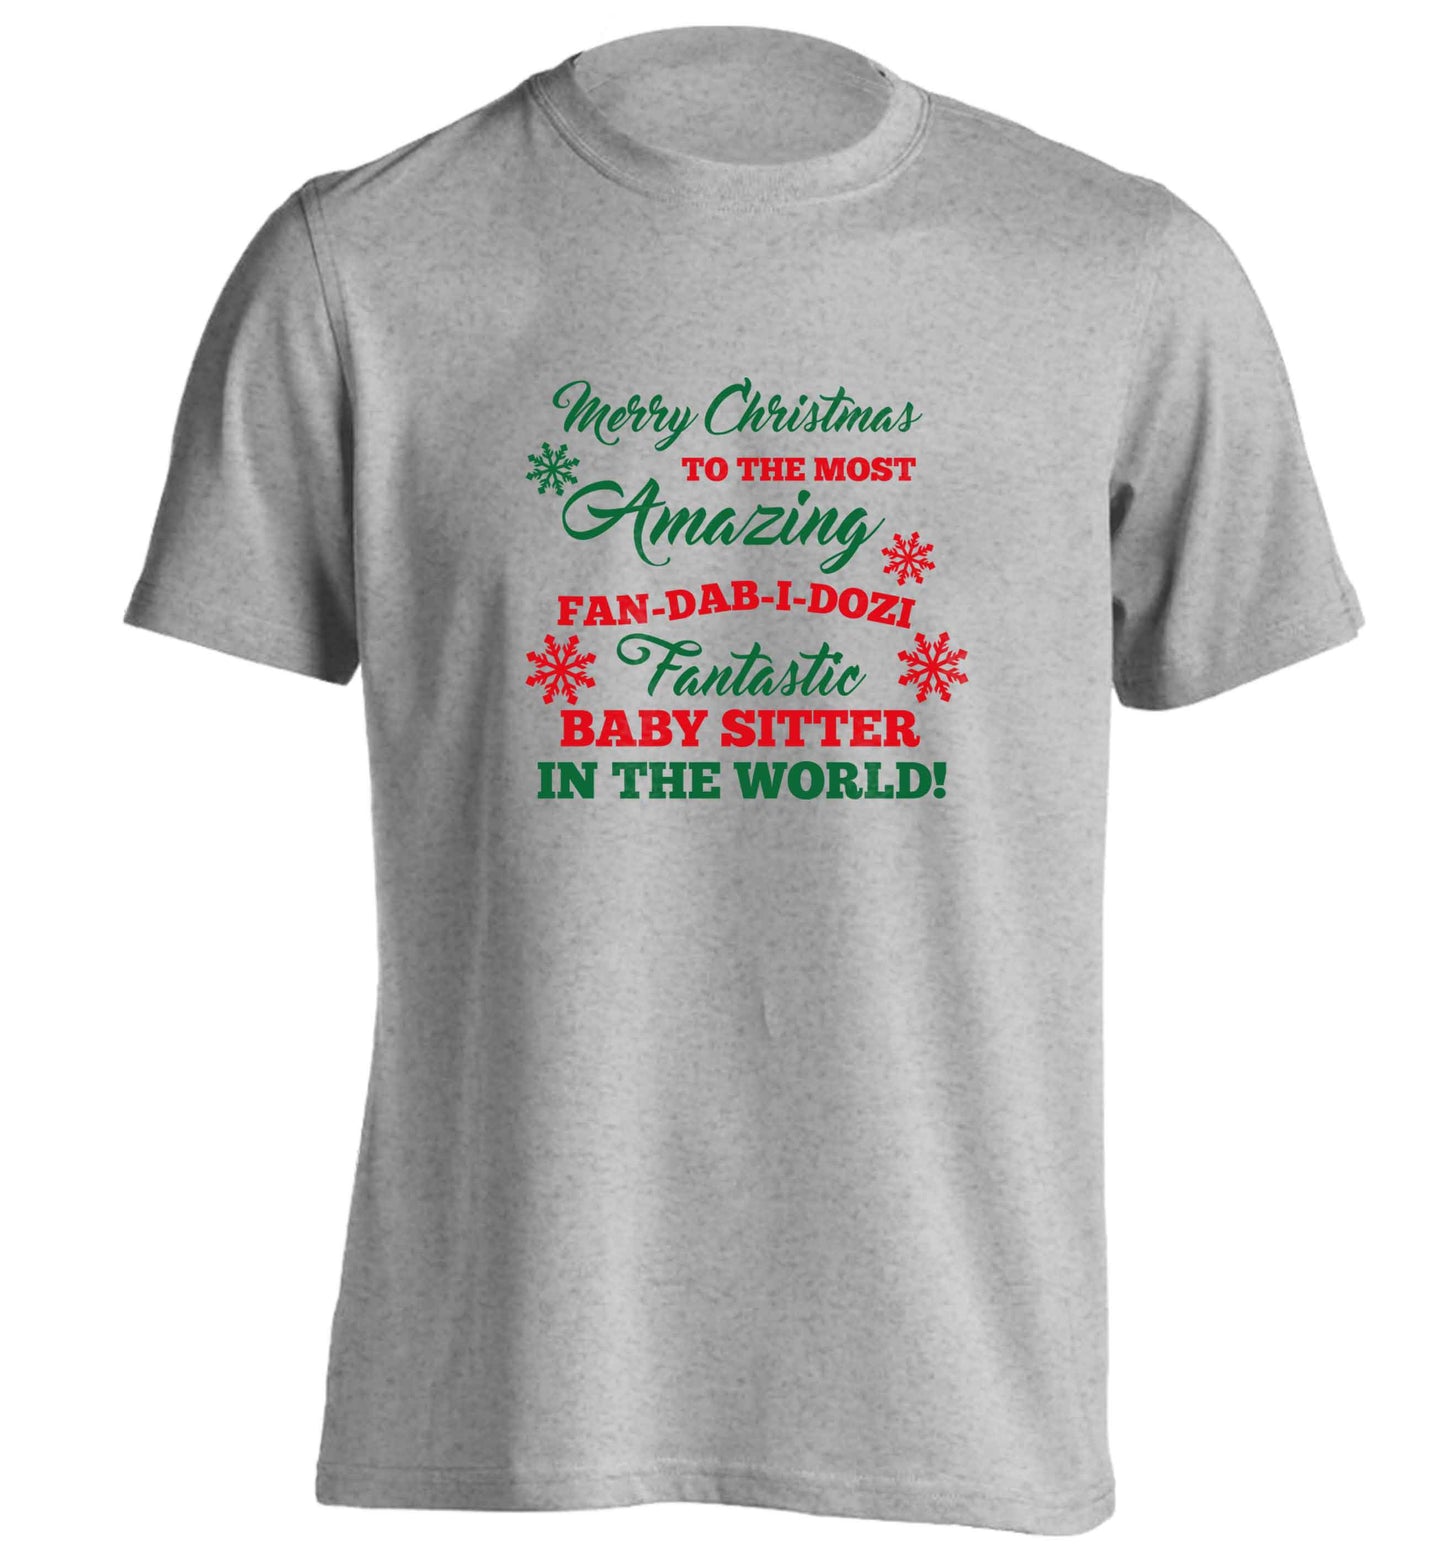 Merry Christmas to the most amazing fan-dab-i-dozi fantasic baby sitter in the world adults unisex grey Tshirt 2XL